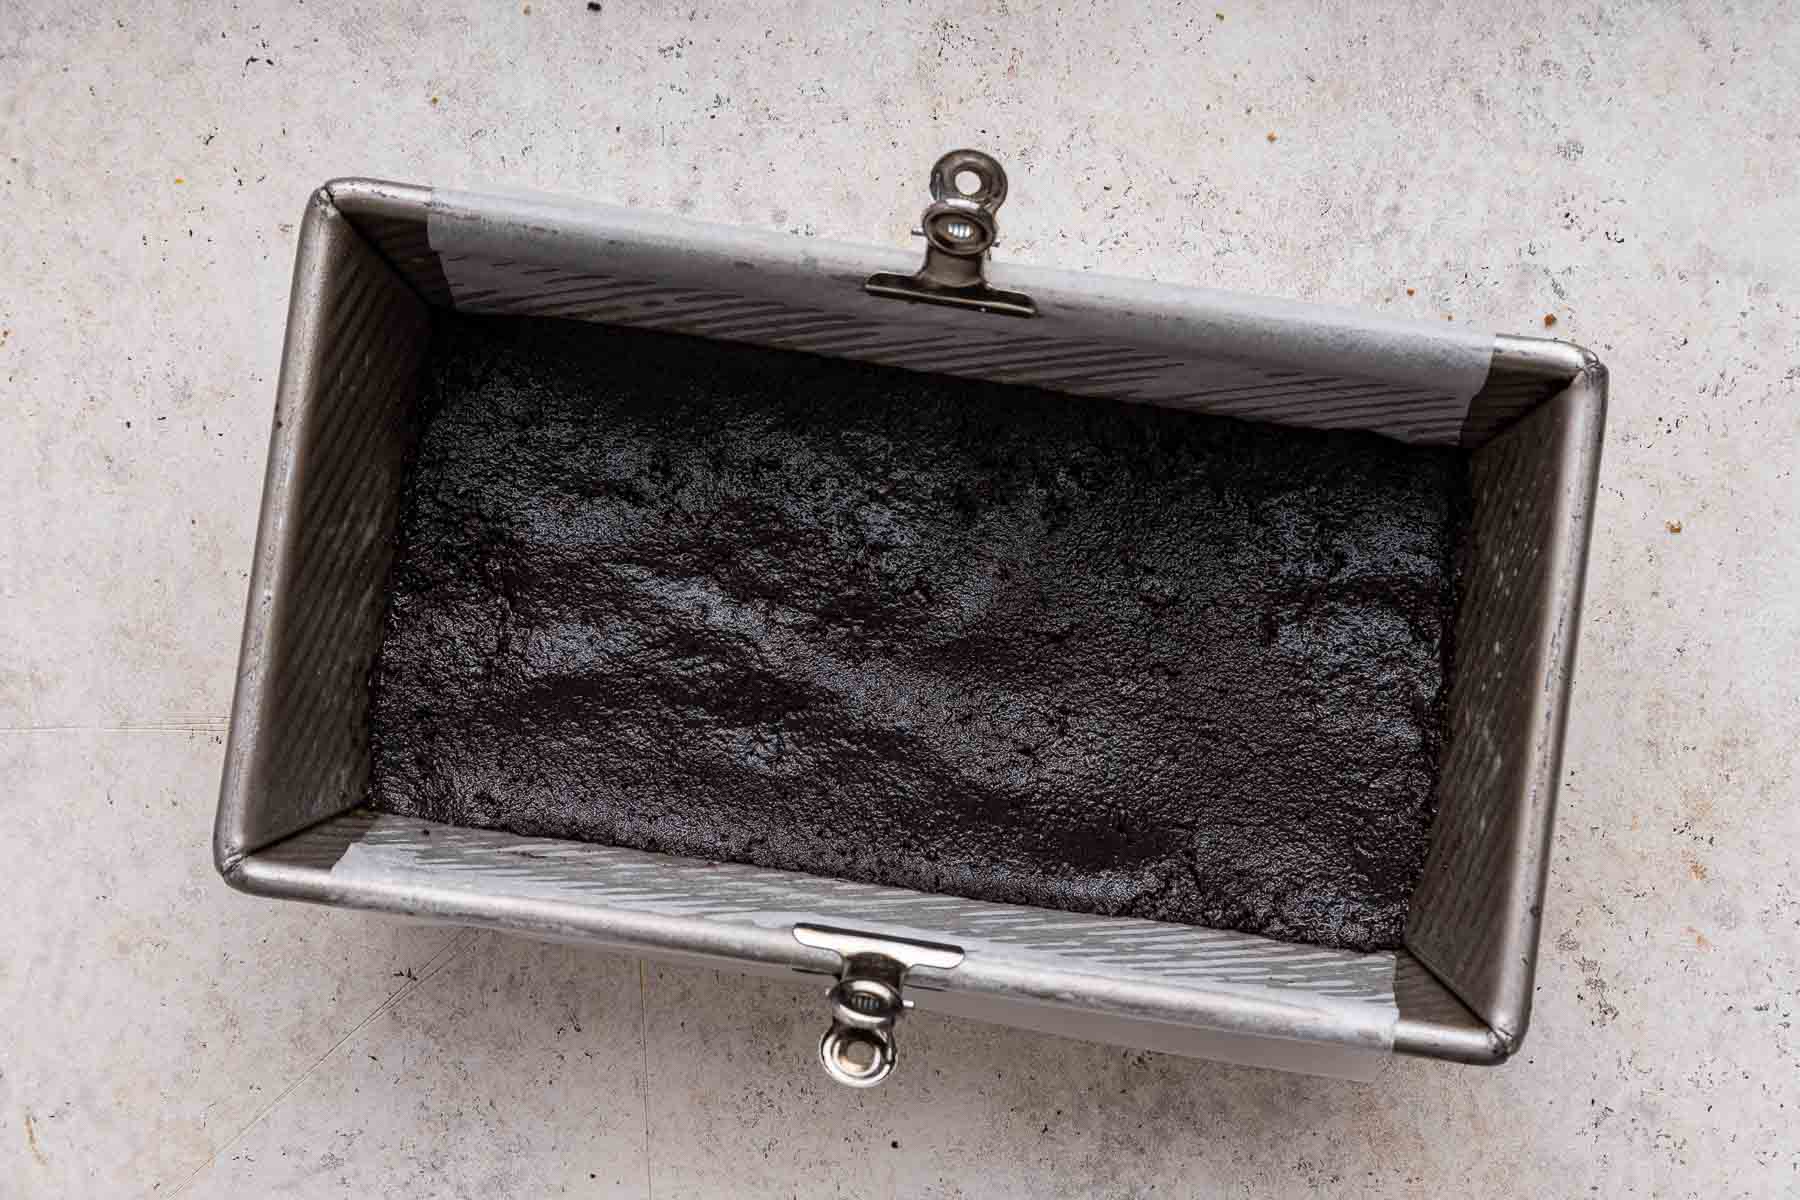 No bake oreo crust in a loaf pan.